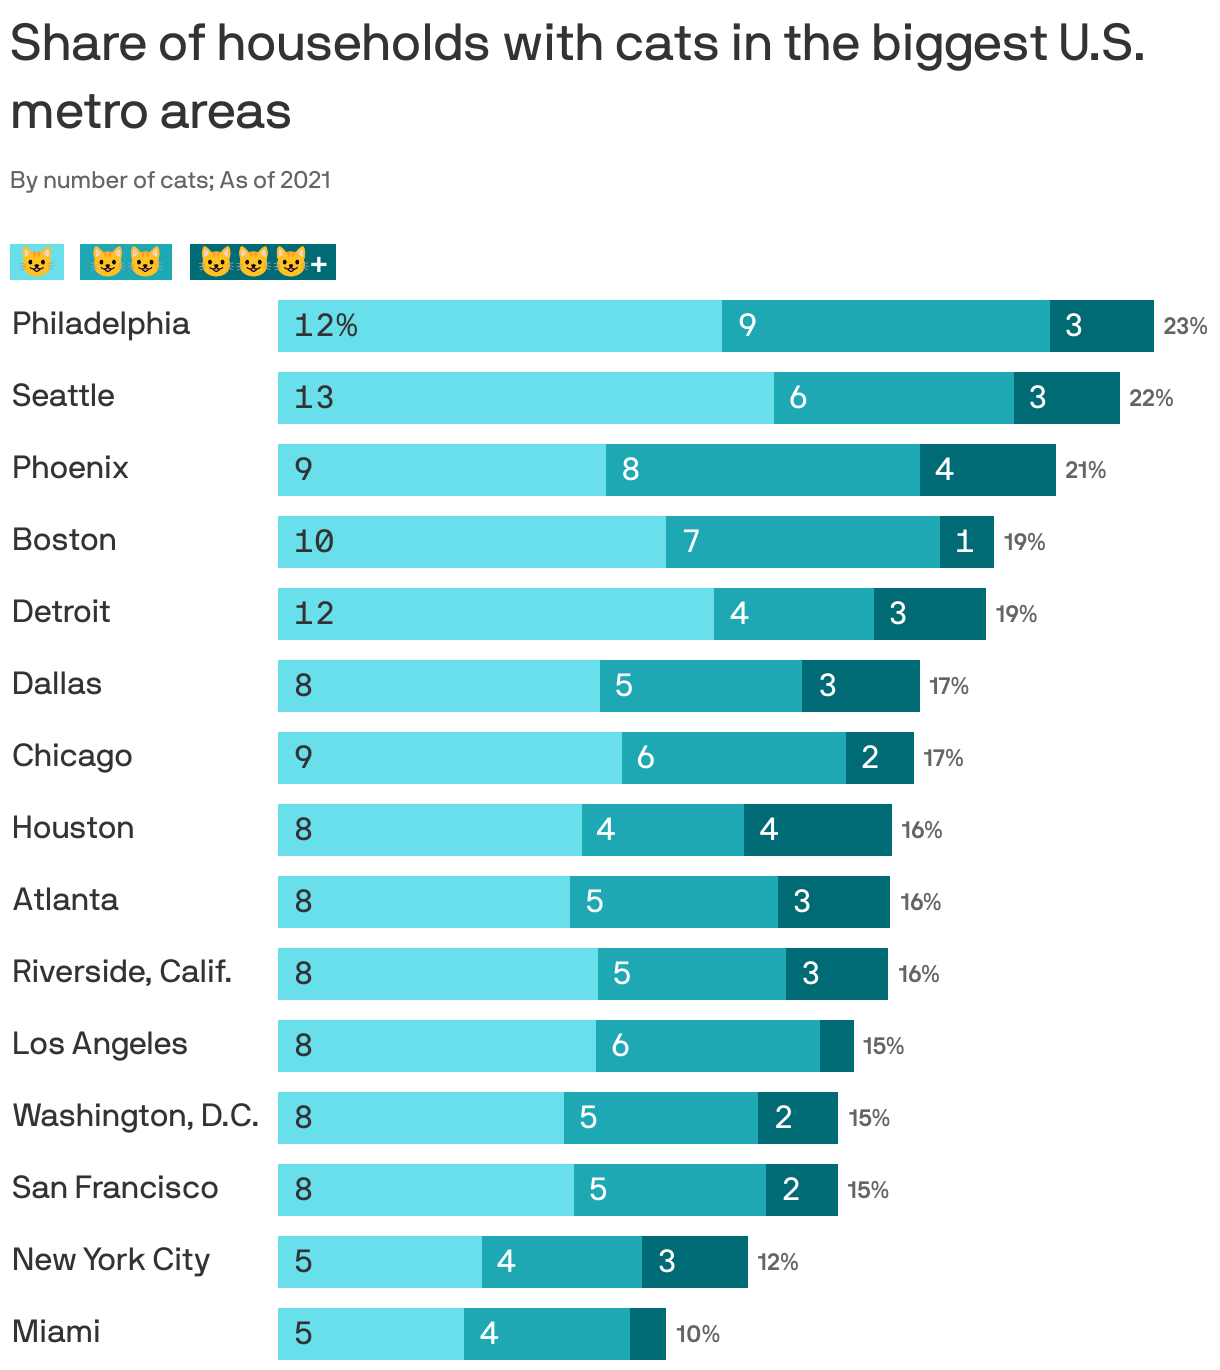 Share of households with cats in the biggest U.S. metro areas